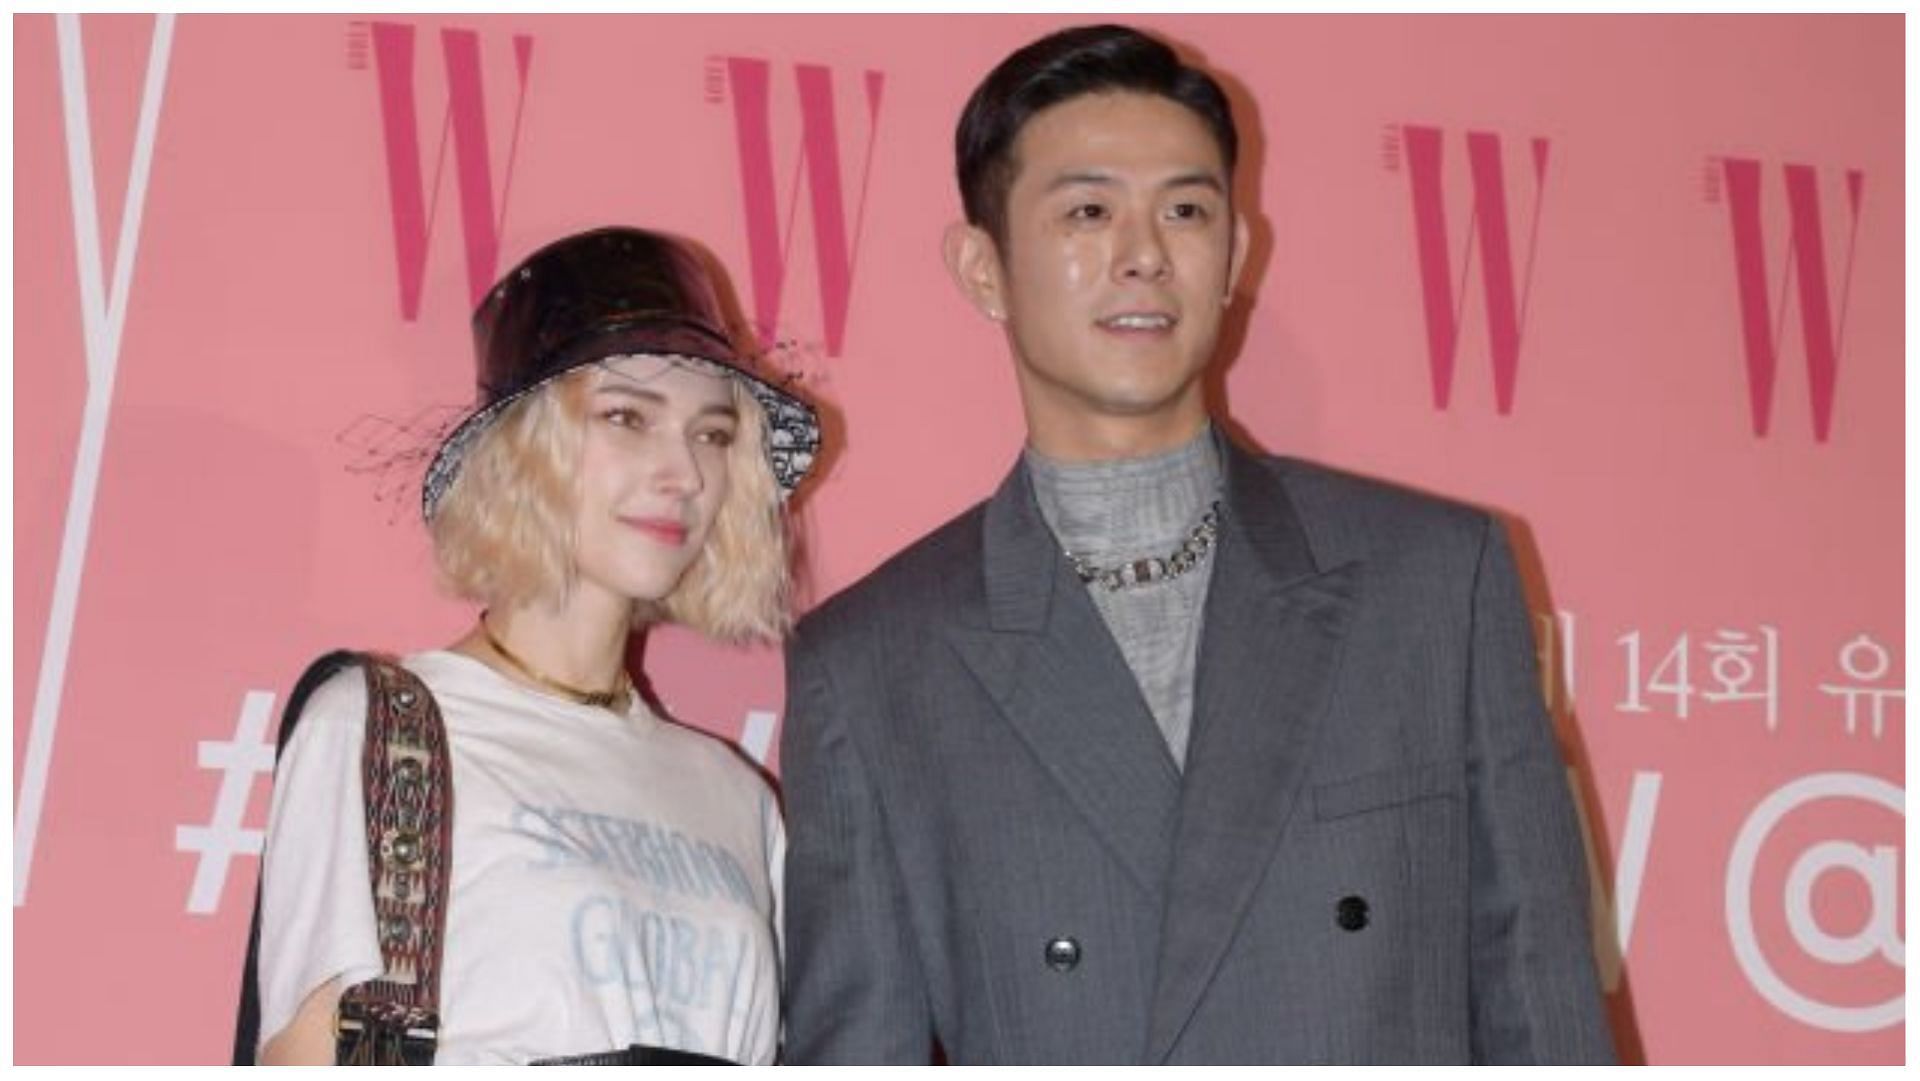 Beenzino and Stefanie Michova are now officially married (Image via The Chosunilbo JNS/Imazins/Getty Images)